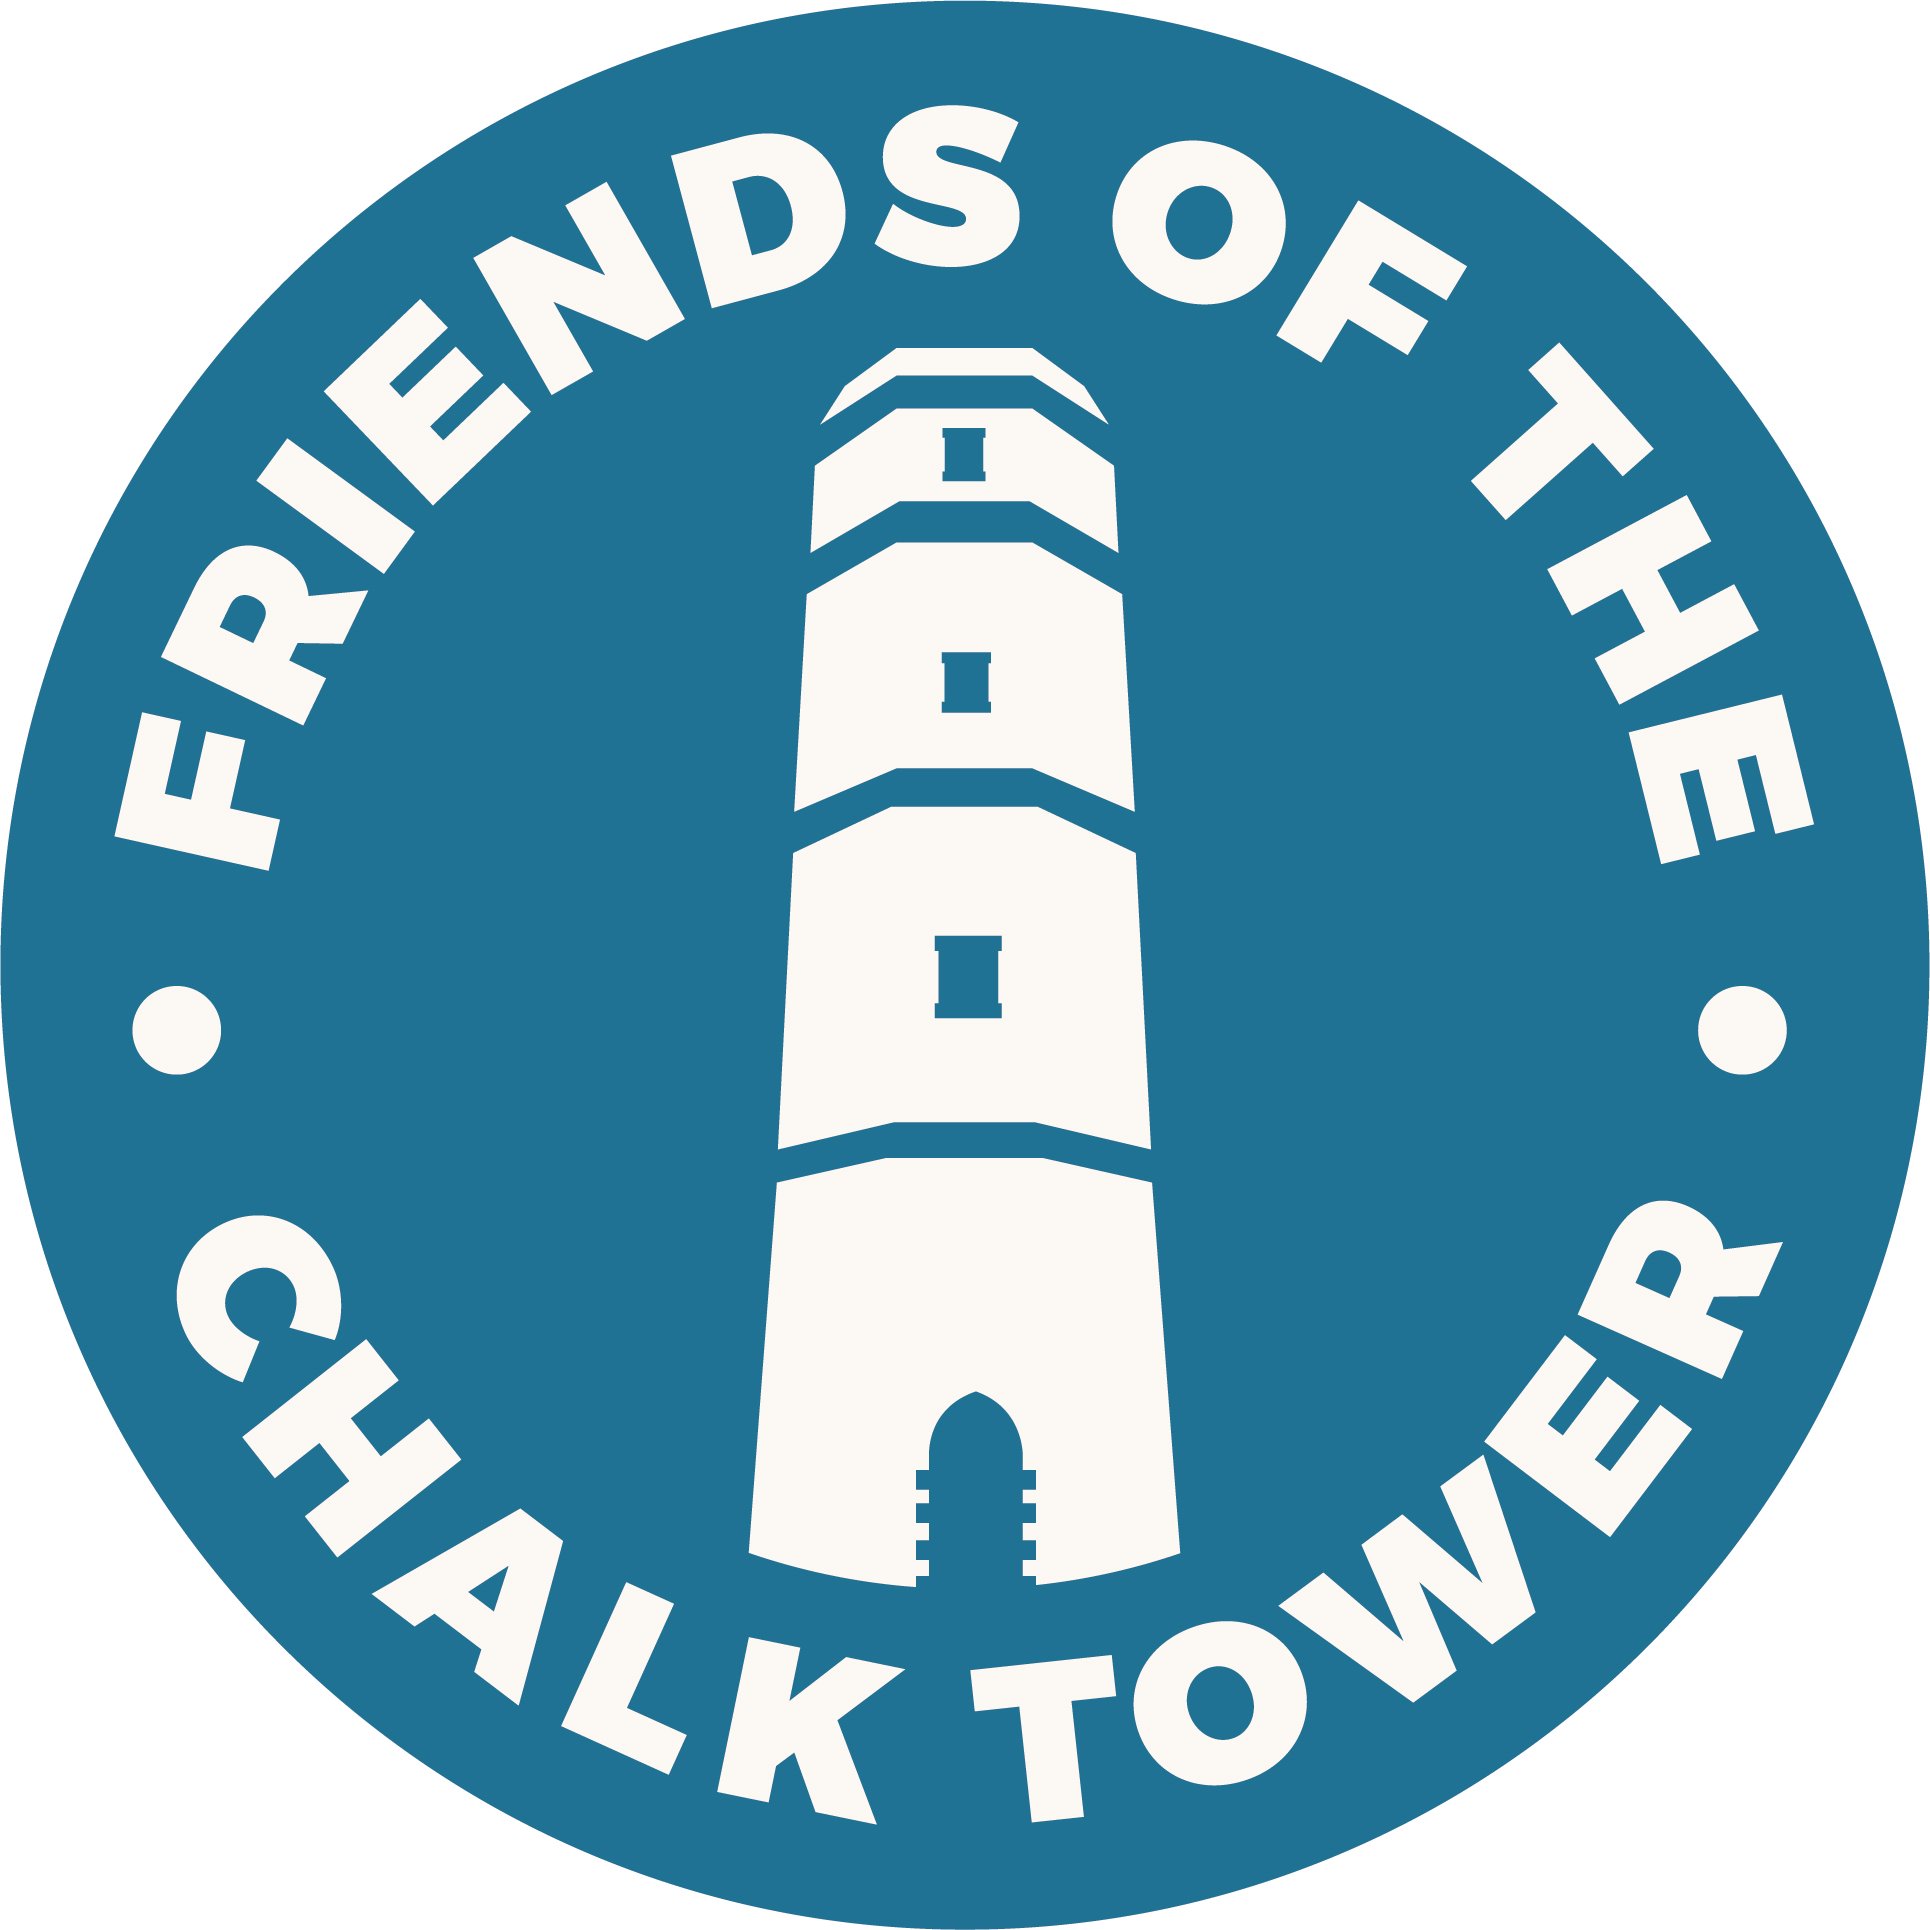 Image name Friends of the Chalk Tower Logo CMYK CLR JUN22 the 20 image from the post Friends of the Chalk Tower Quiz night in Yorkshire.com.